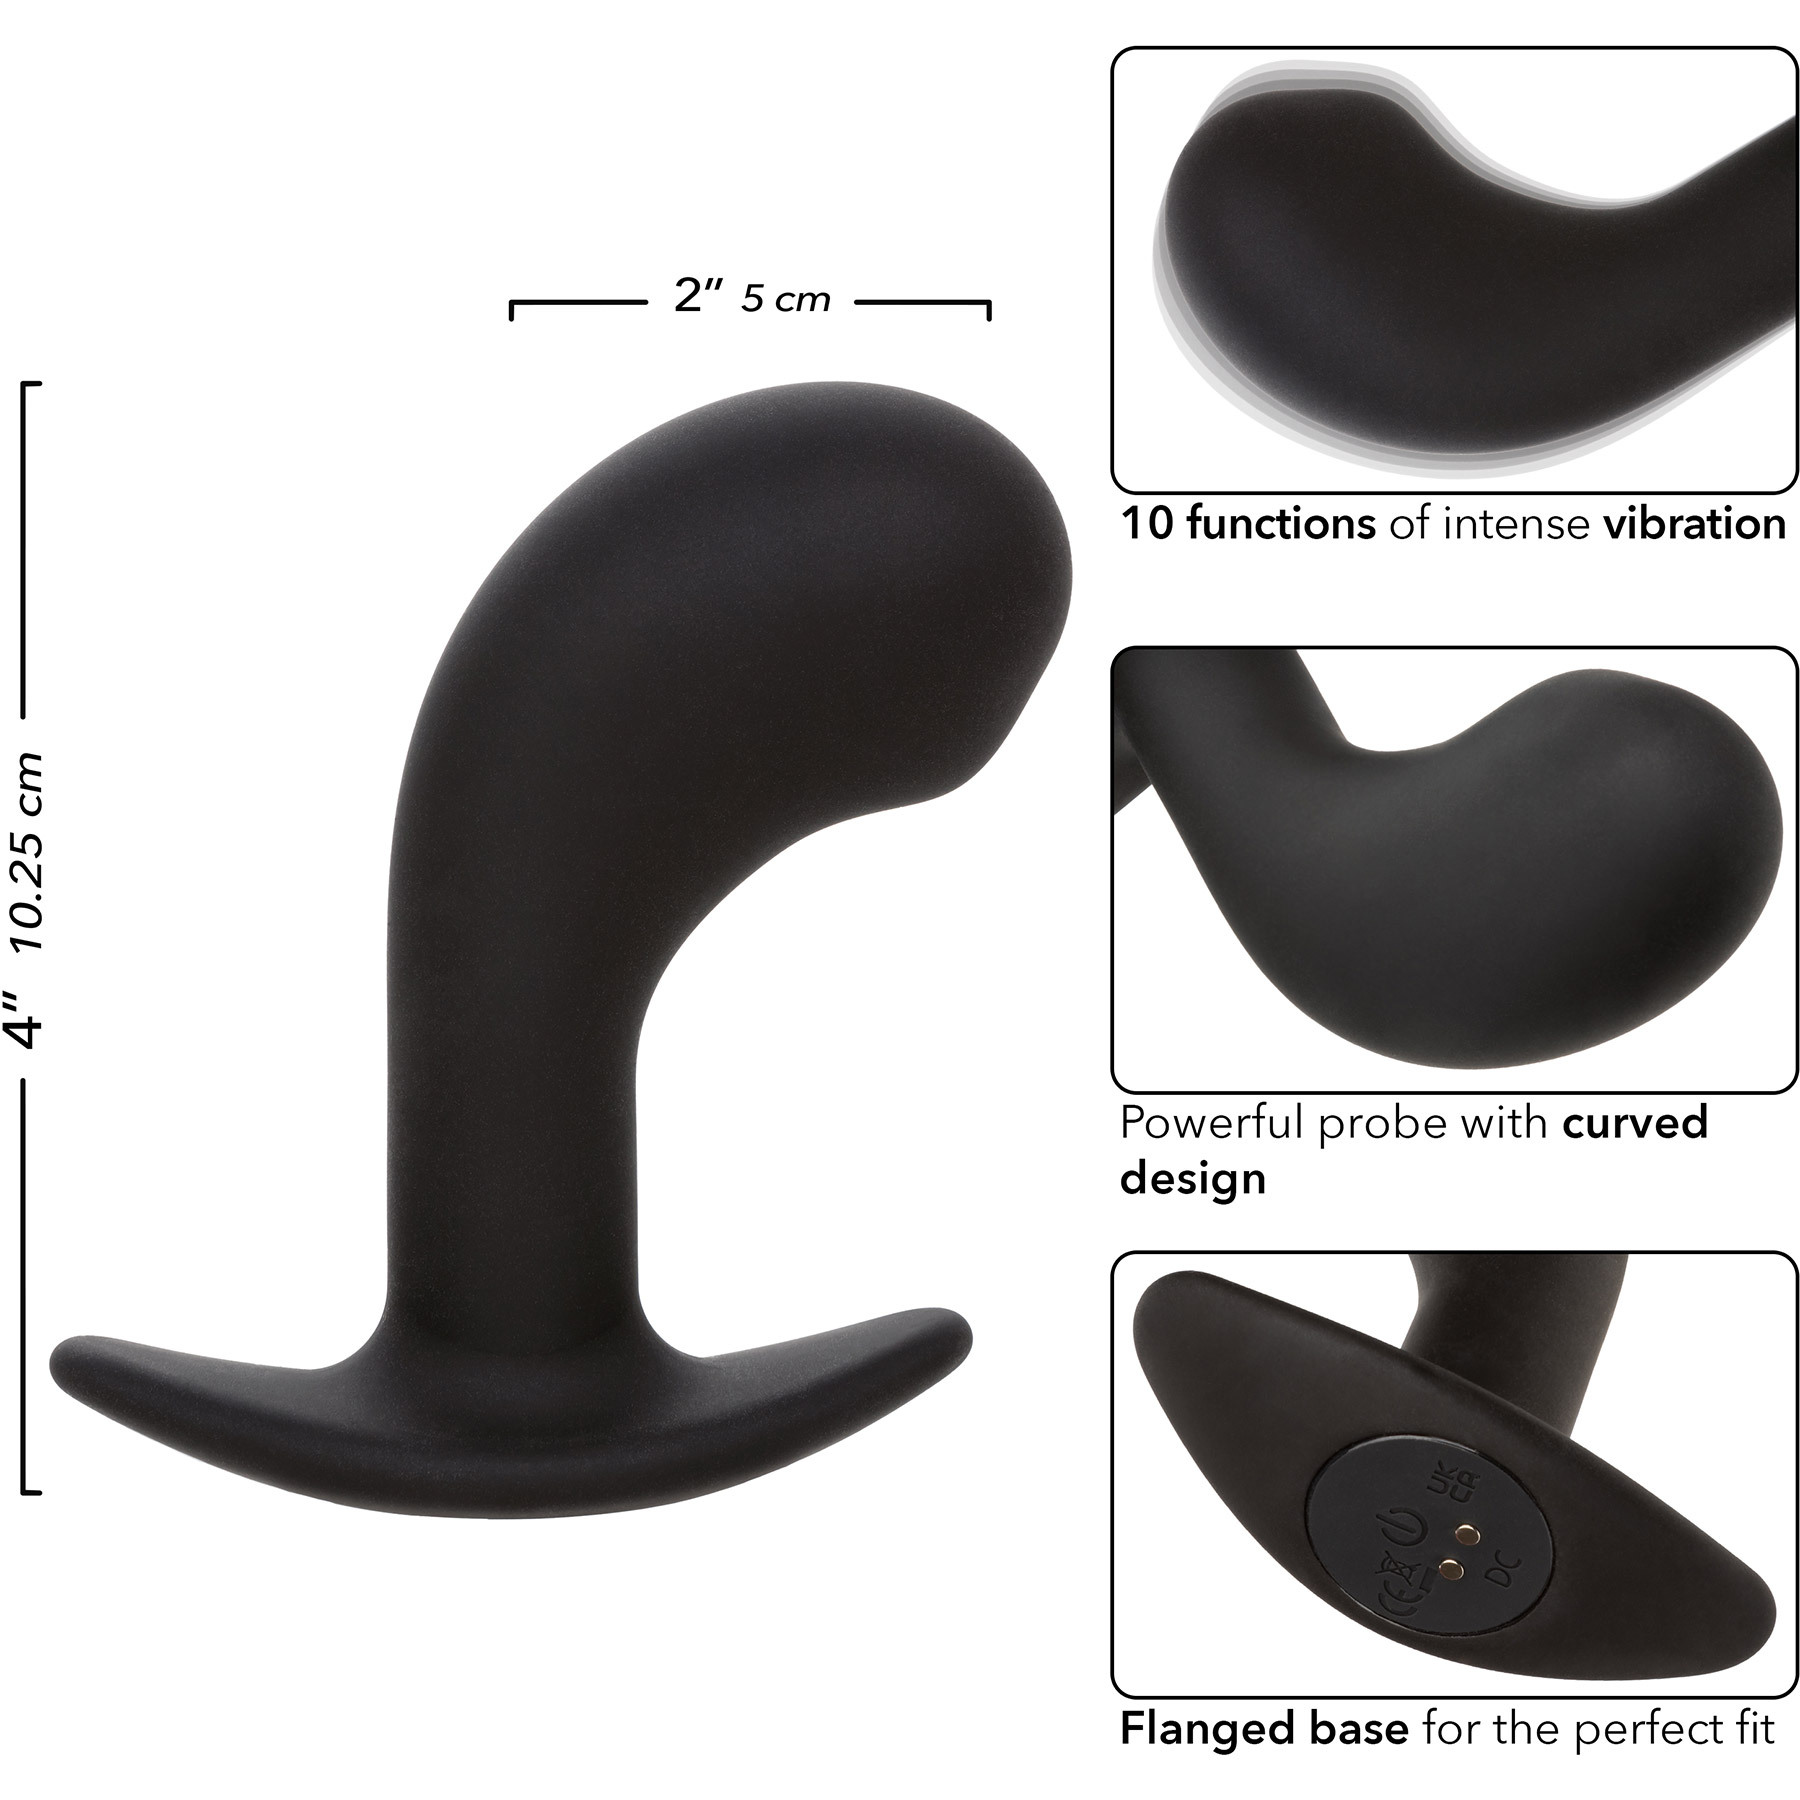 Rock Bottom Curved Probe Rechargeable Waterproof Silicone Vibrating Prostate Massager - Measurements